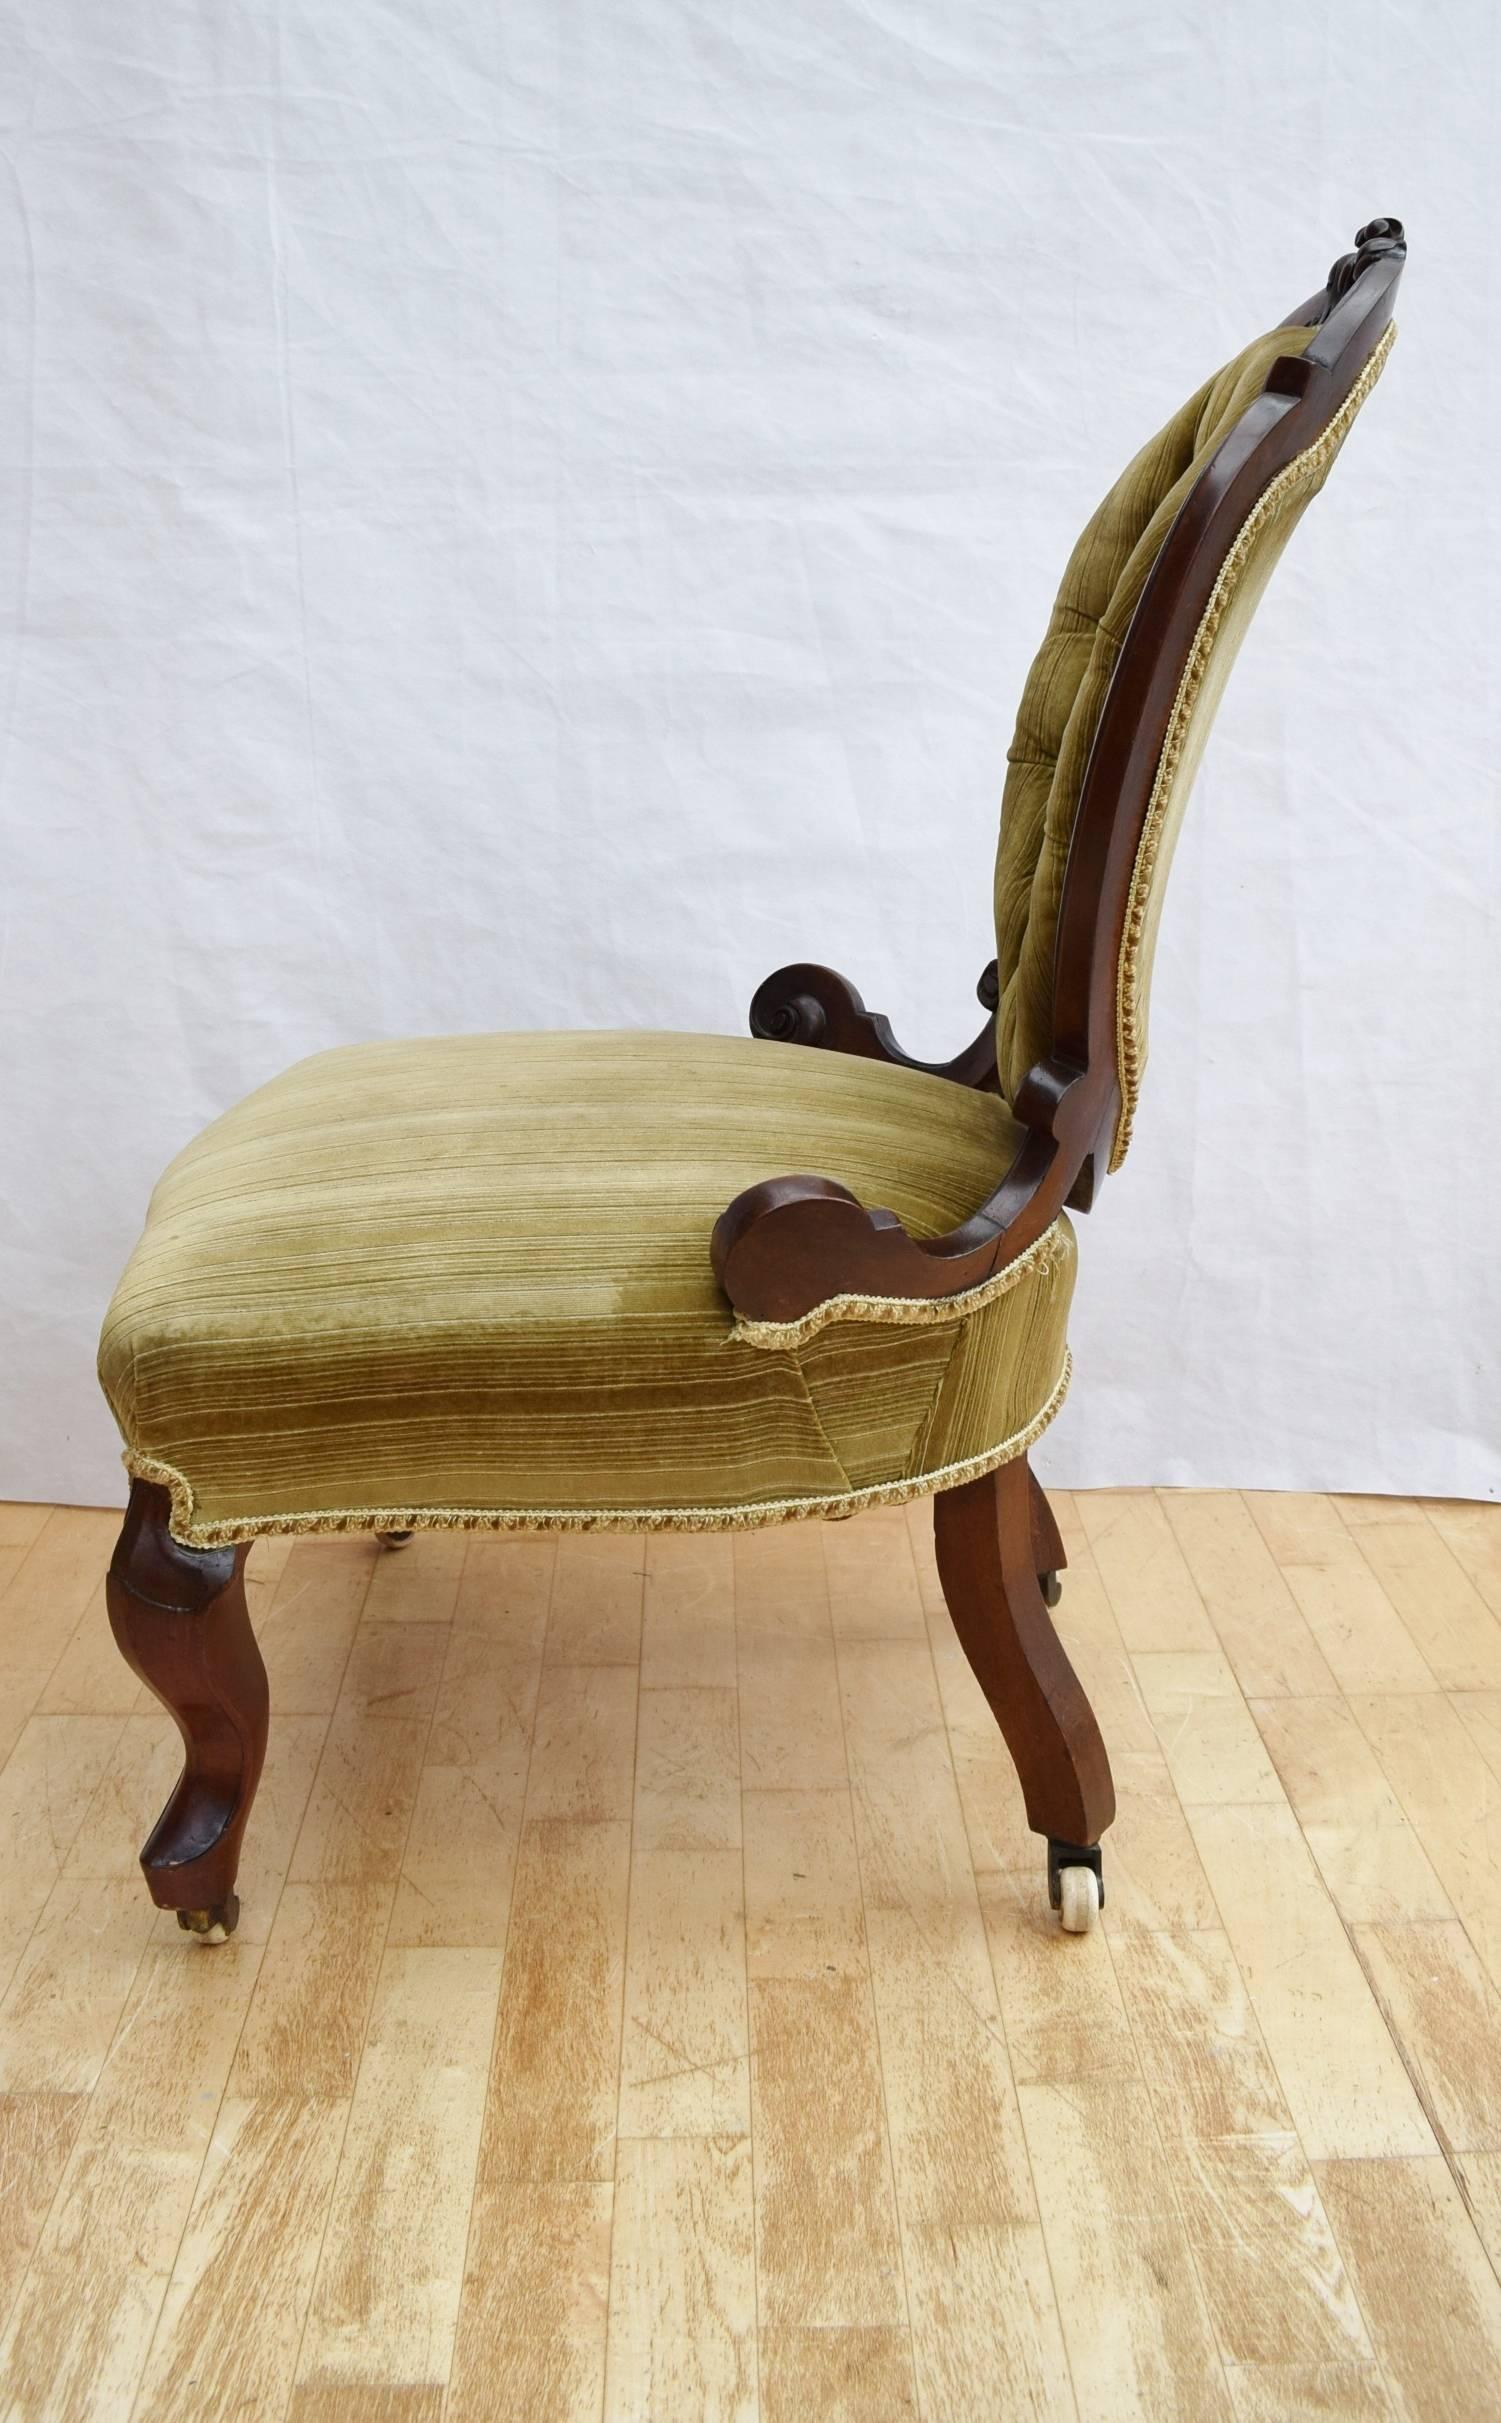 
Deeply buttoned shaped oval backrest with contrasting braide

Enclosed by a walnut moulded shaped and carved frame with central cresting

Fixed padded webbed and sprung base with small side arm supports to the rear

The upholstery is a heavy